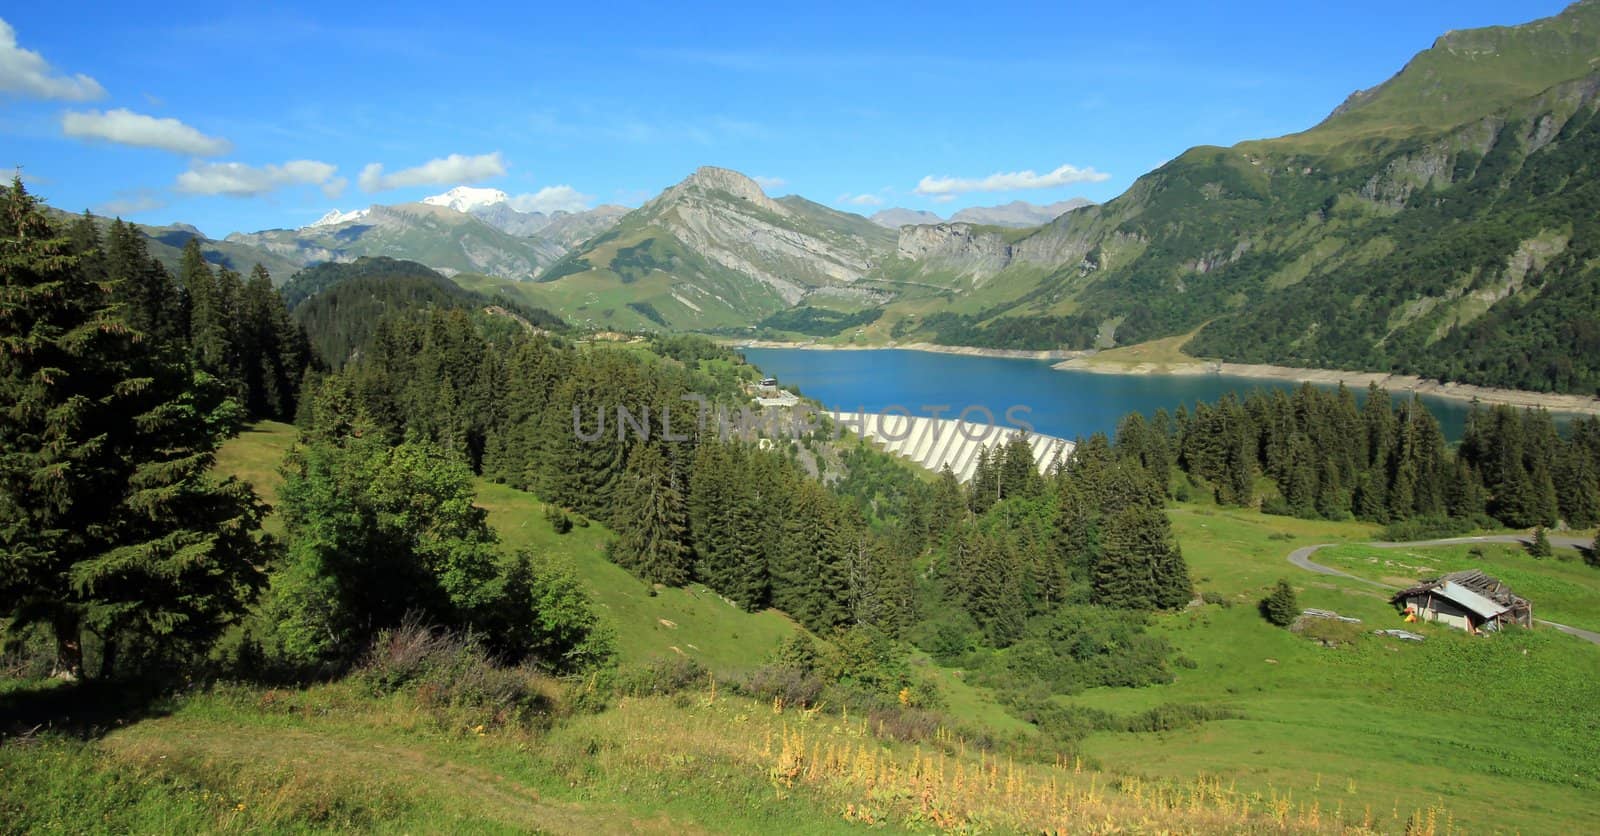 View on Roselend lake and dam in the Alps mountains, France